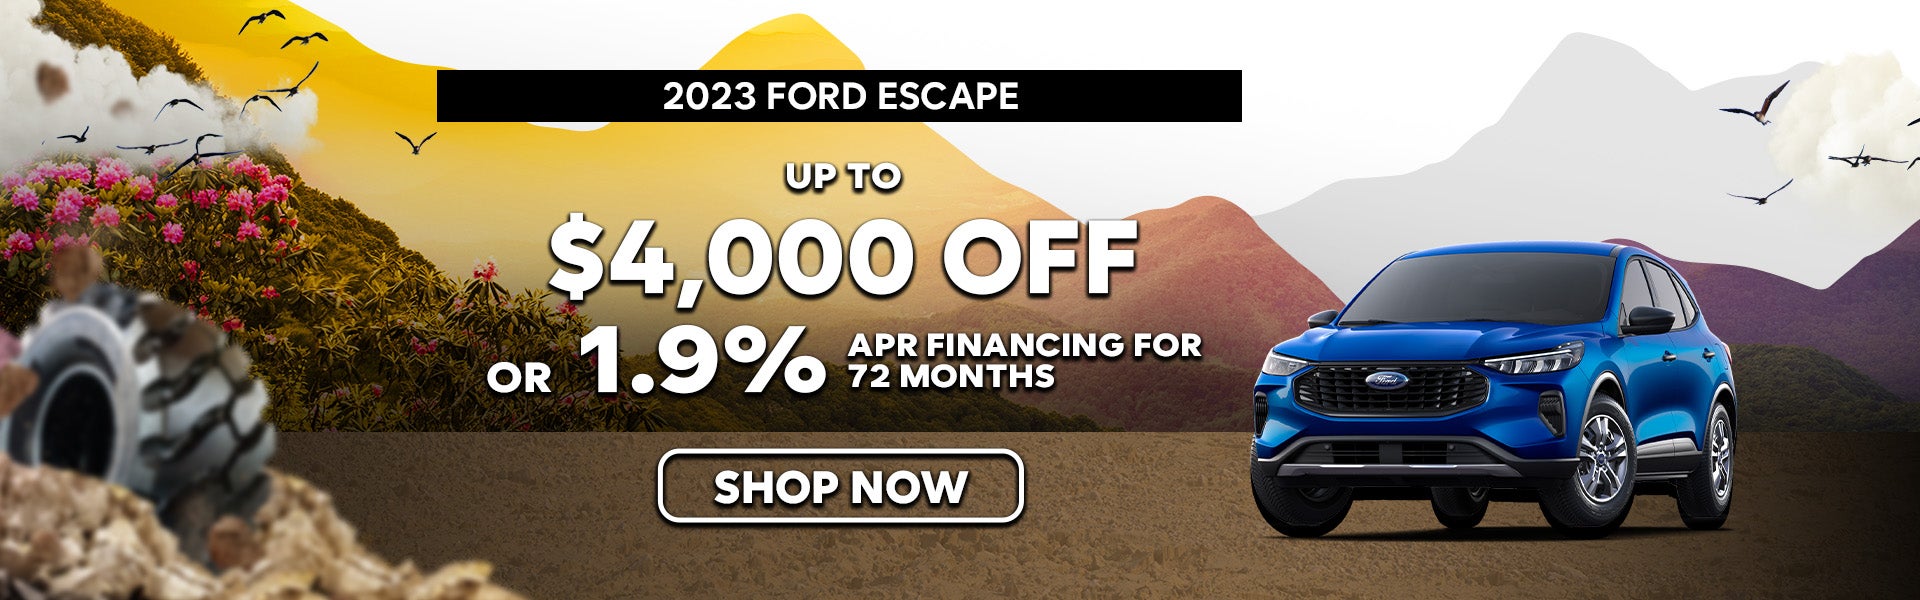 2023 Ford Escape Special Offer